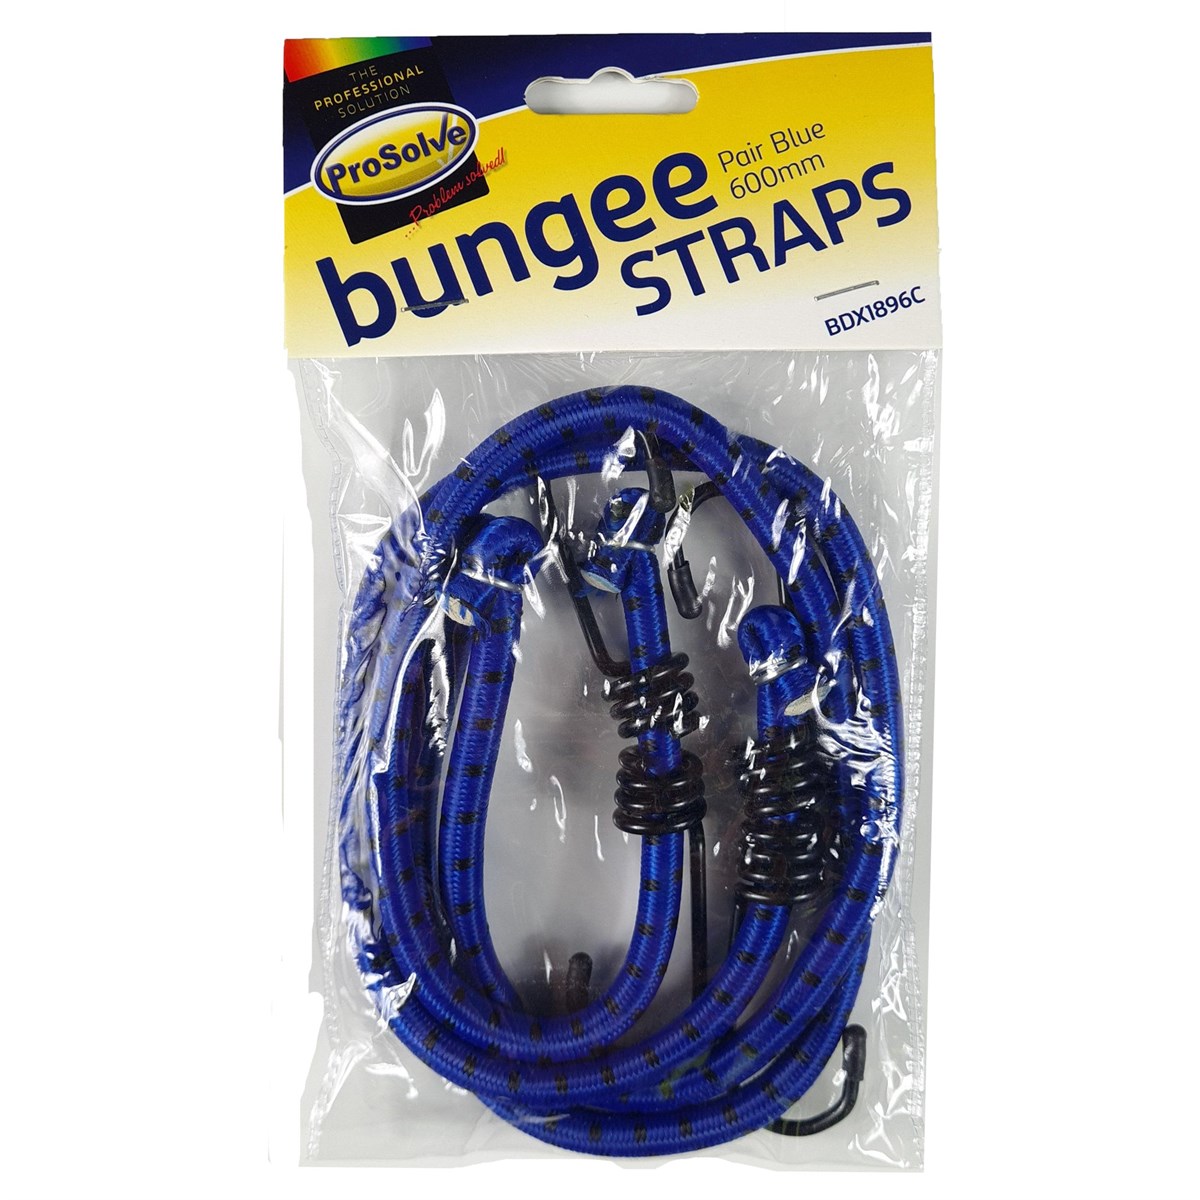 600mm Bungee Strap, Blue (Twin Pack)